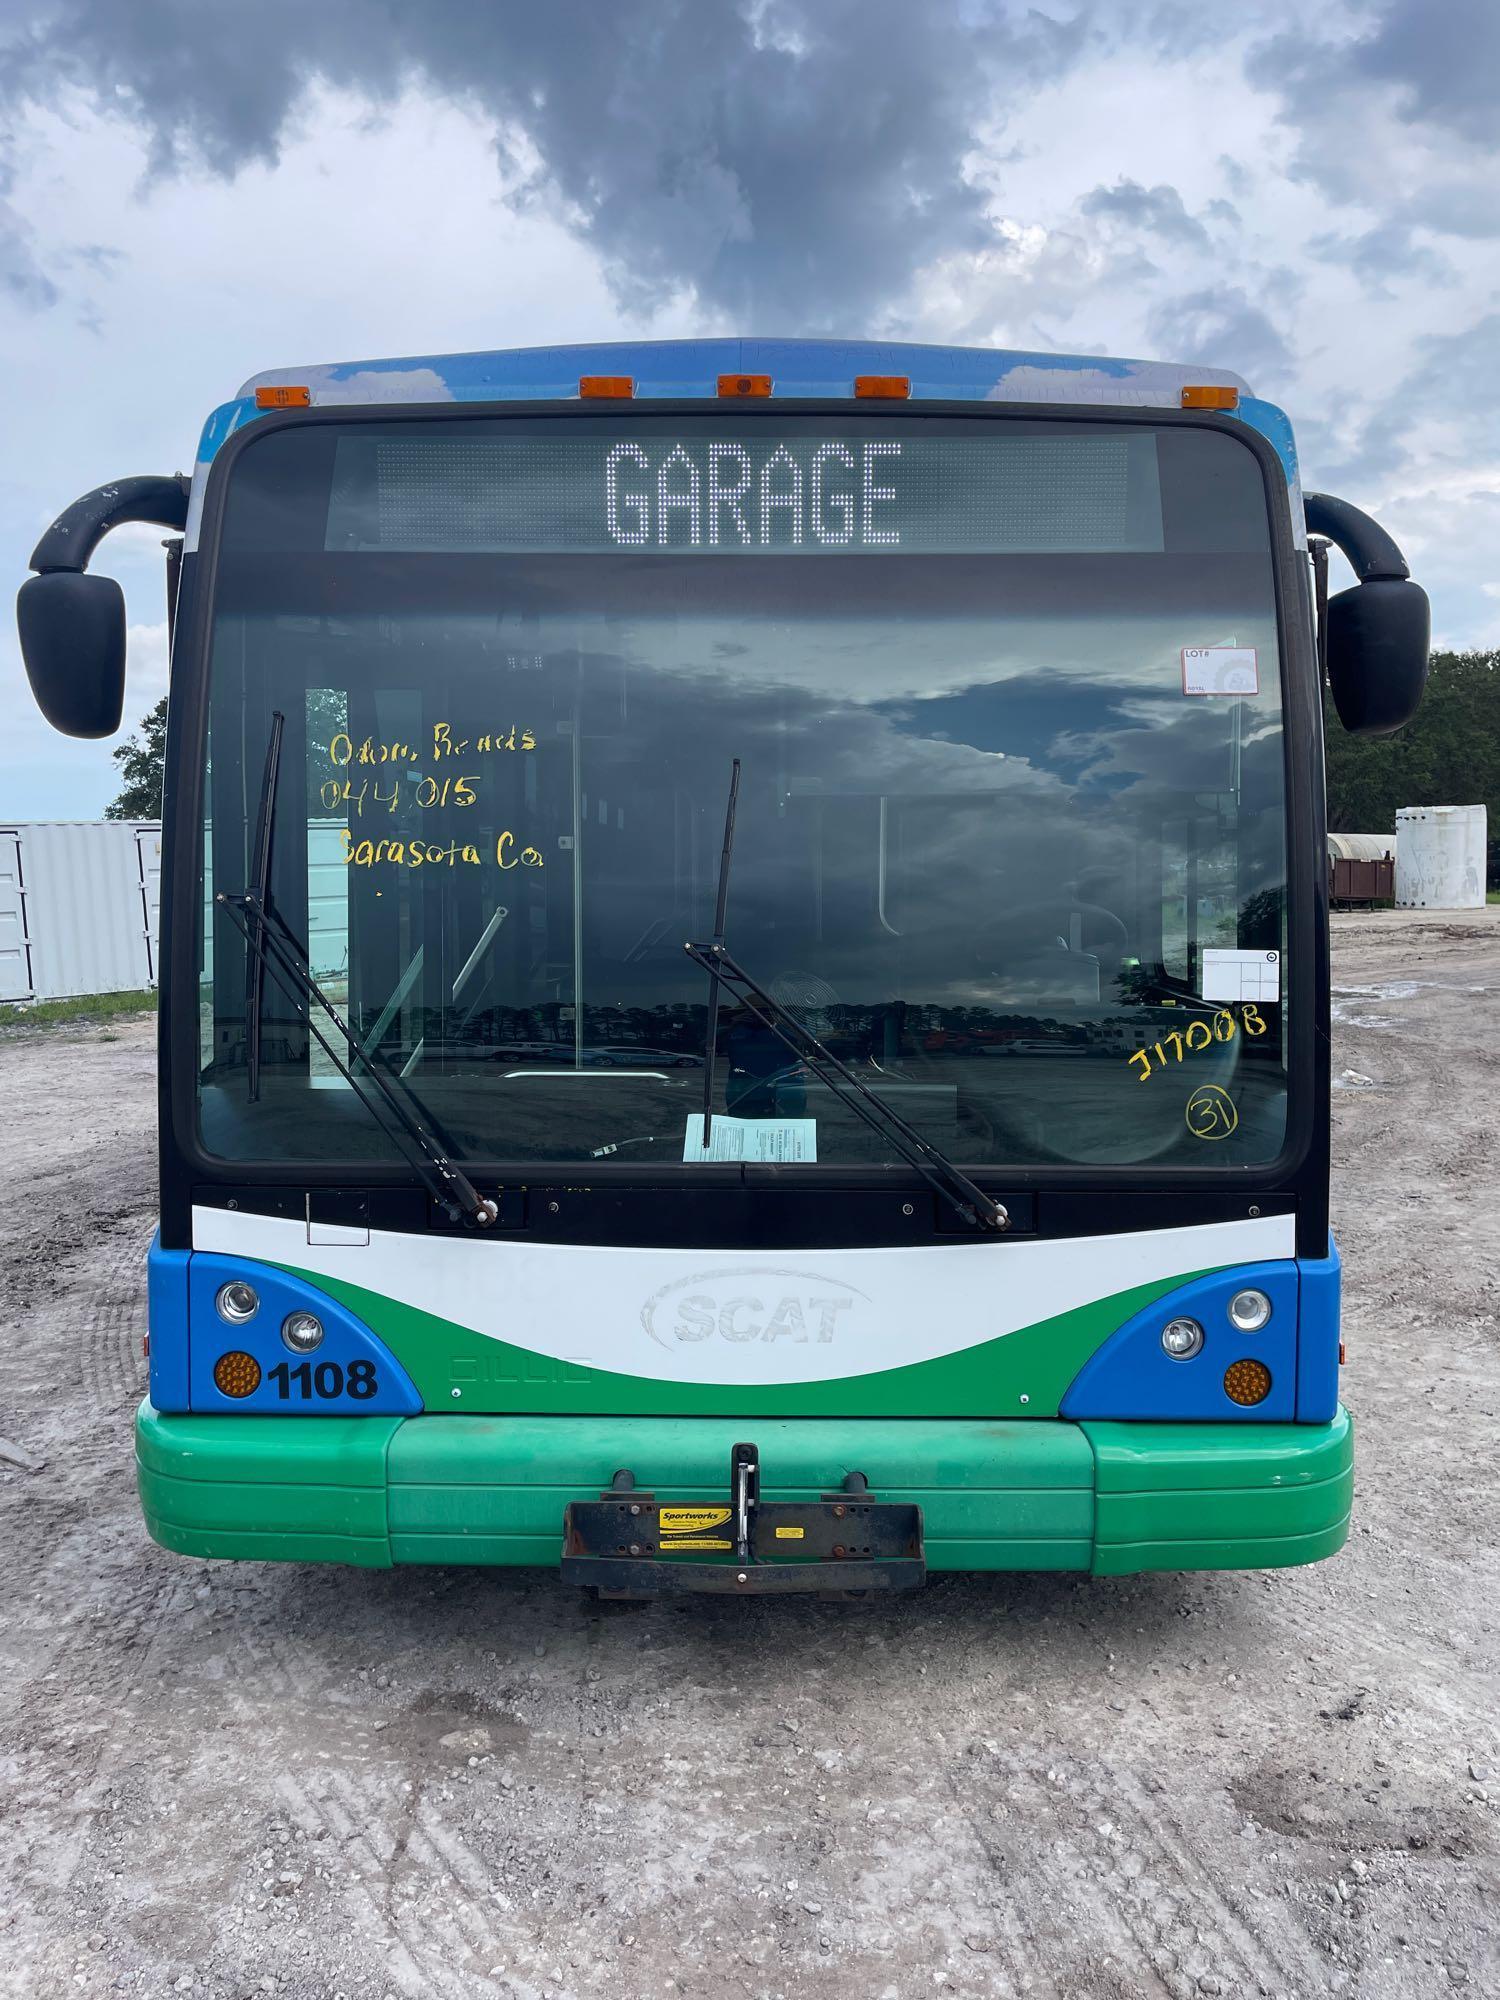 2011 Gillig Low Floor 30+41 Double Entry Passenger Bus